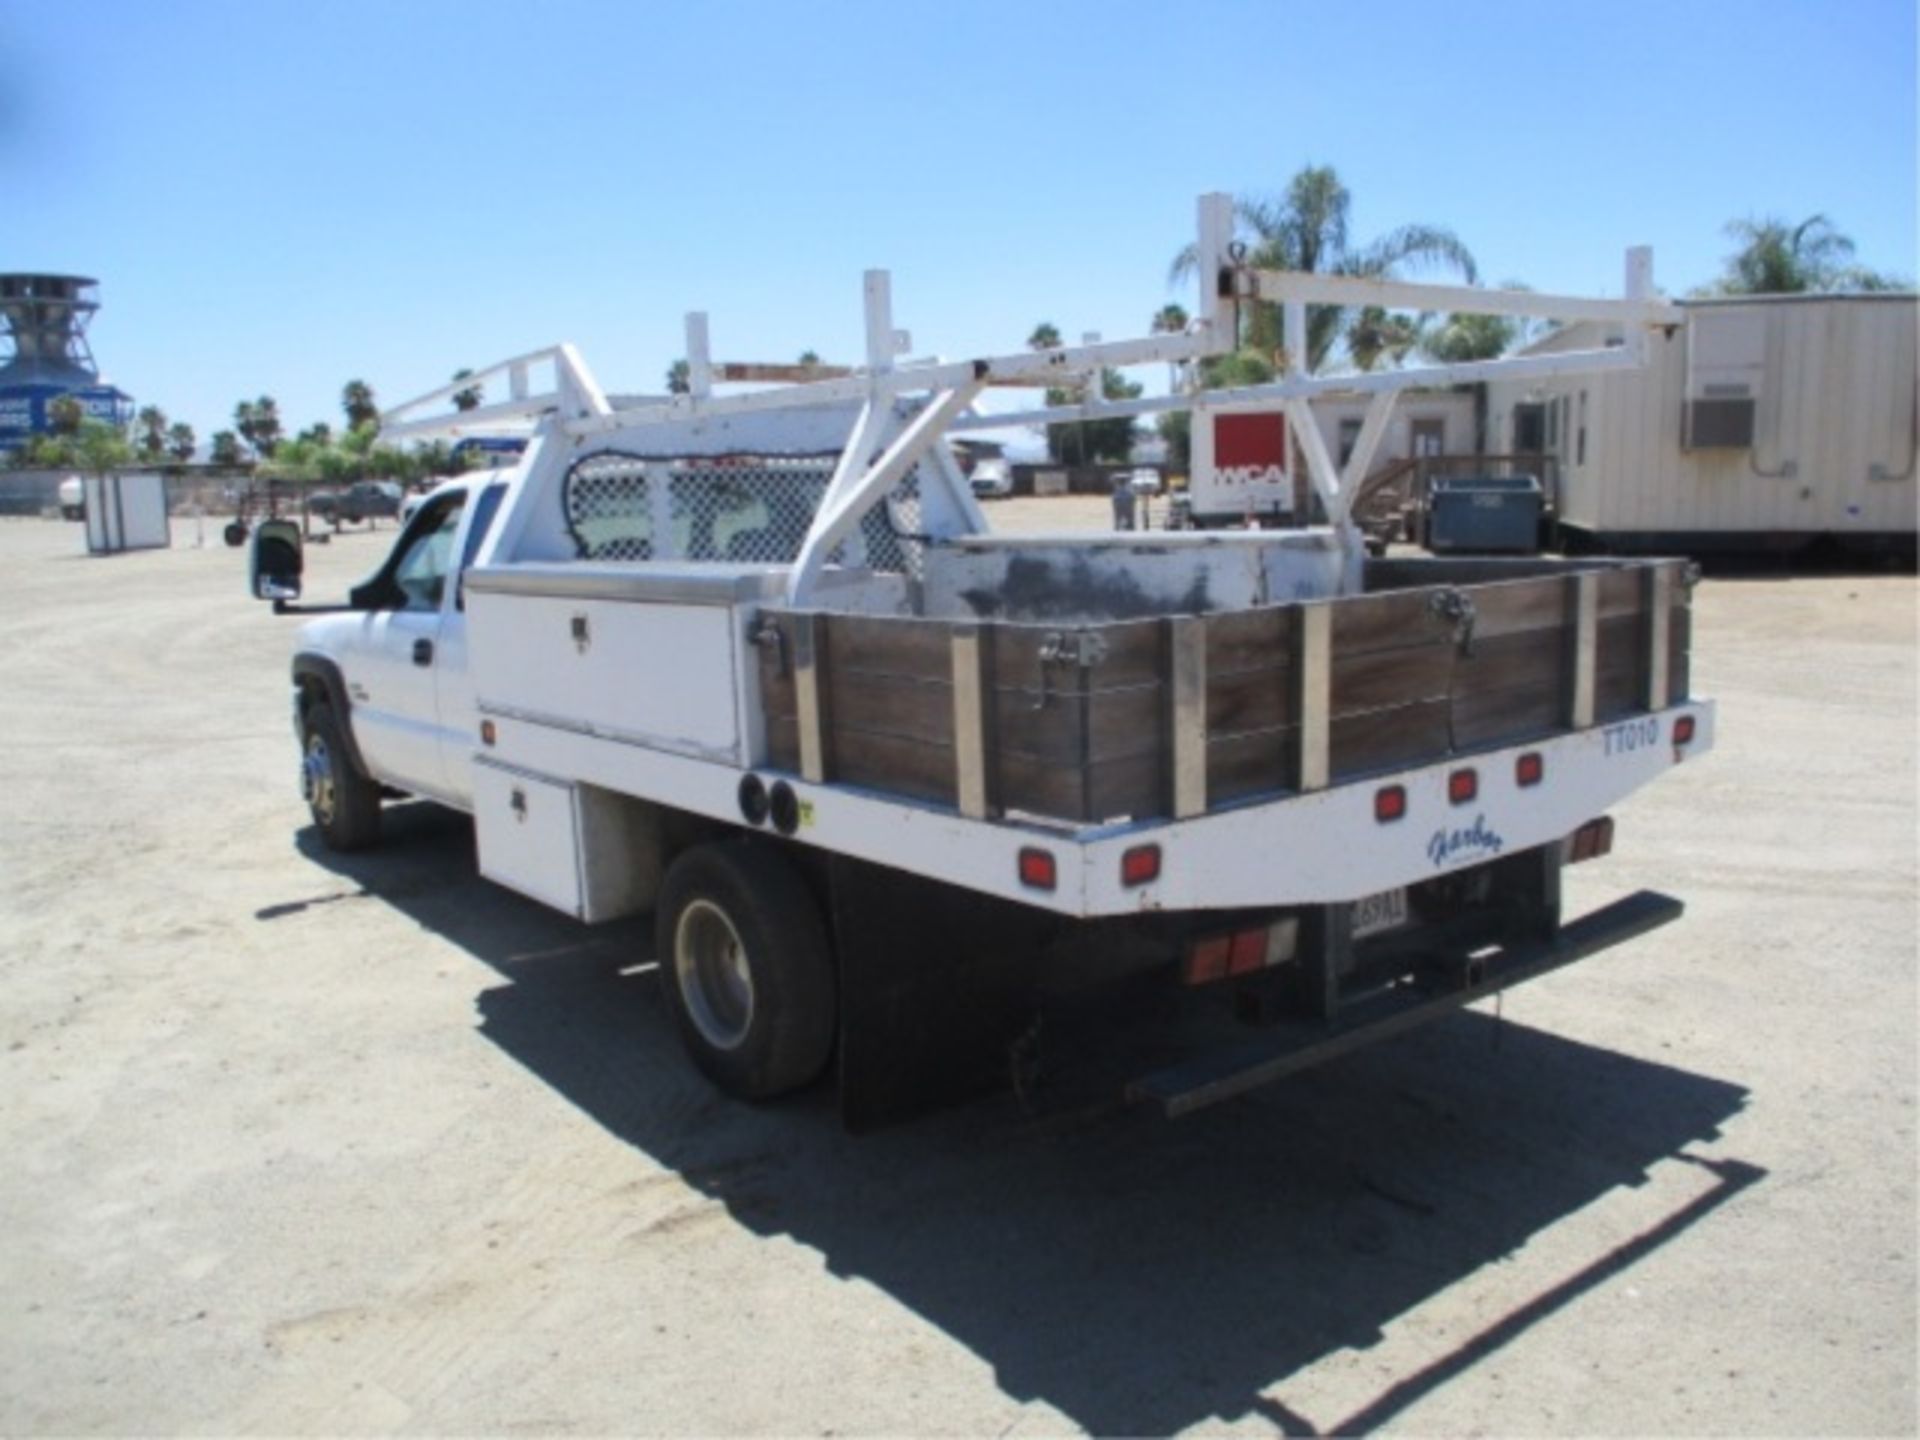 2006 Chevrolet 3500 Extended-Cab Utility Truck, 6.6L Turbo Diesel, Automatic, Tool Boxes, Lumber - Image 23 of 71